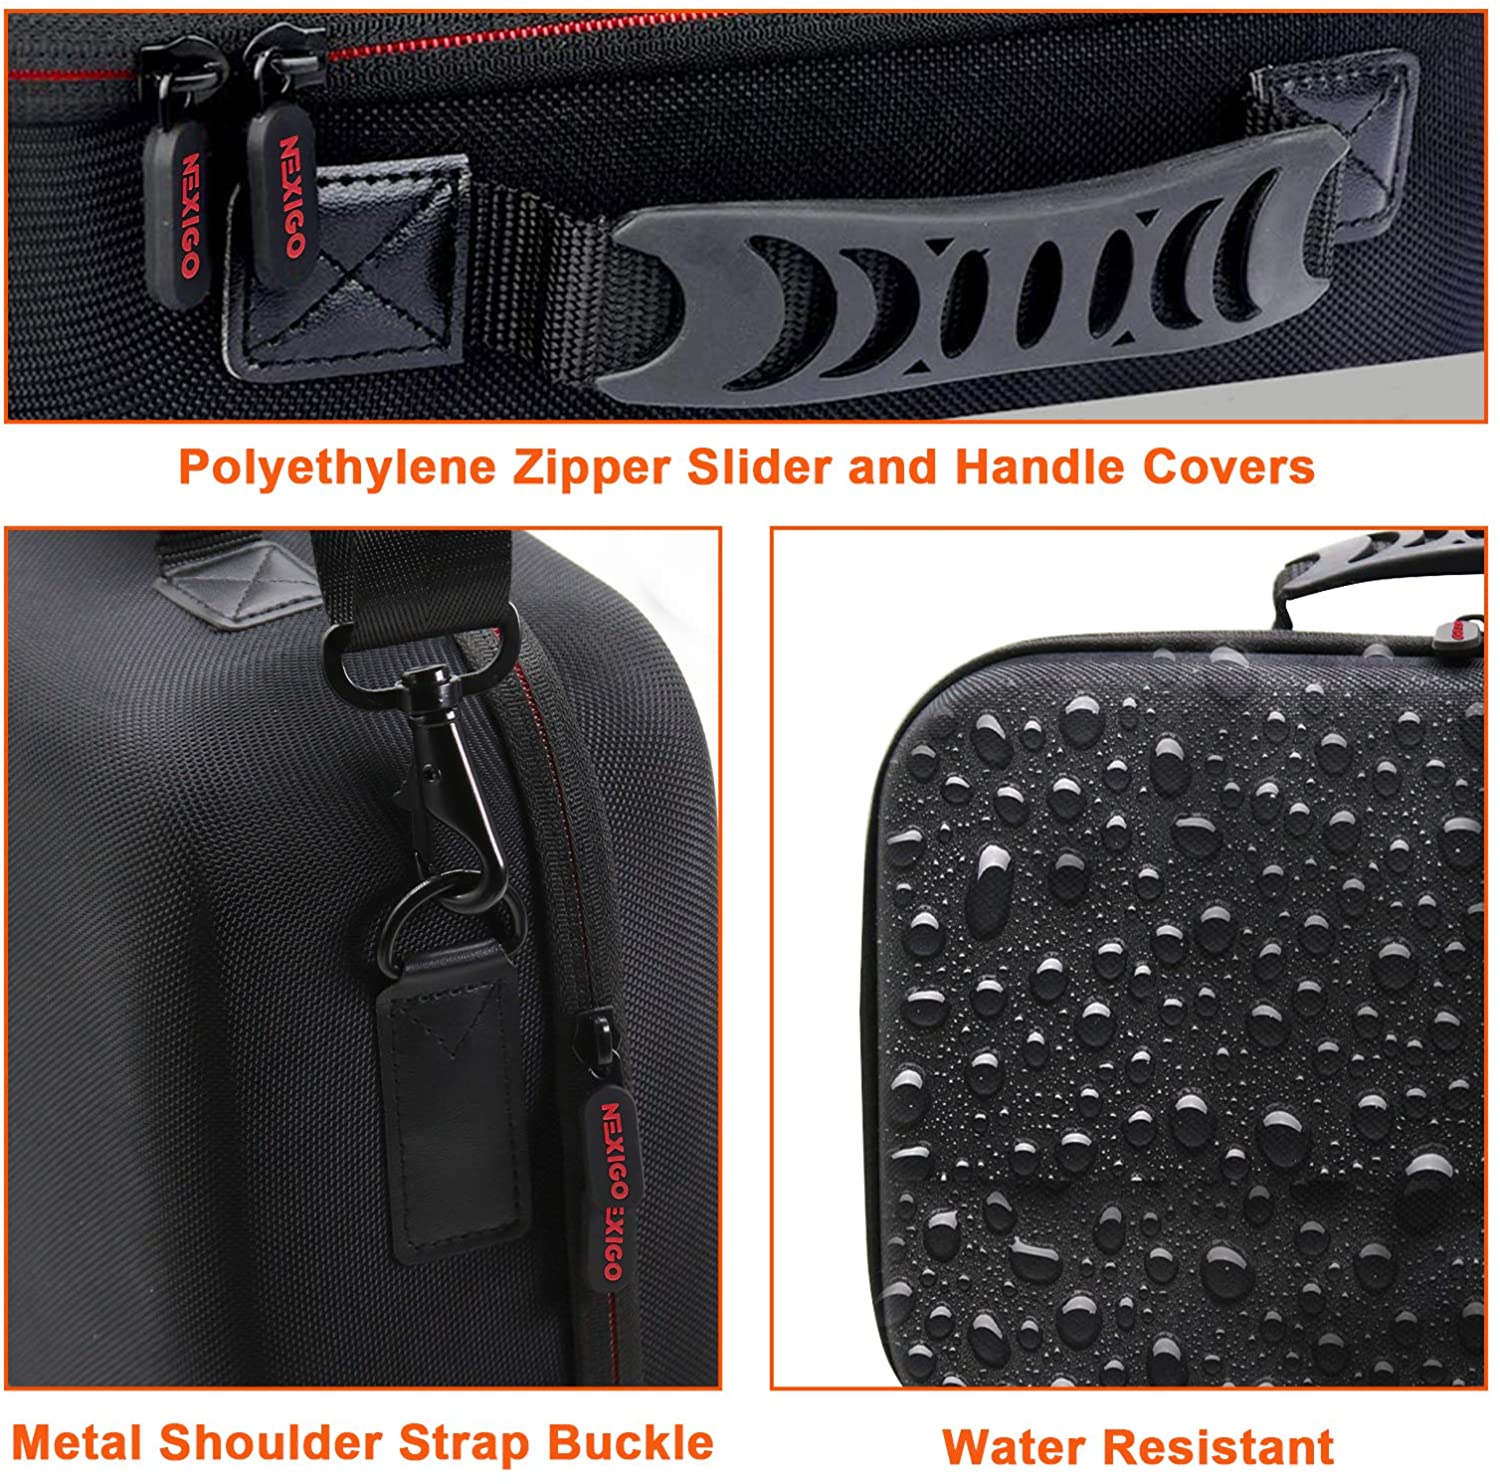 The bag features waterproofing, metal buckles, and sturdy zippers.